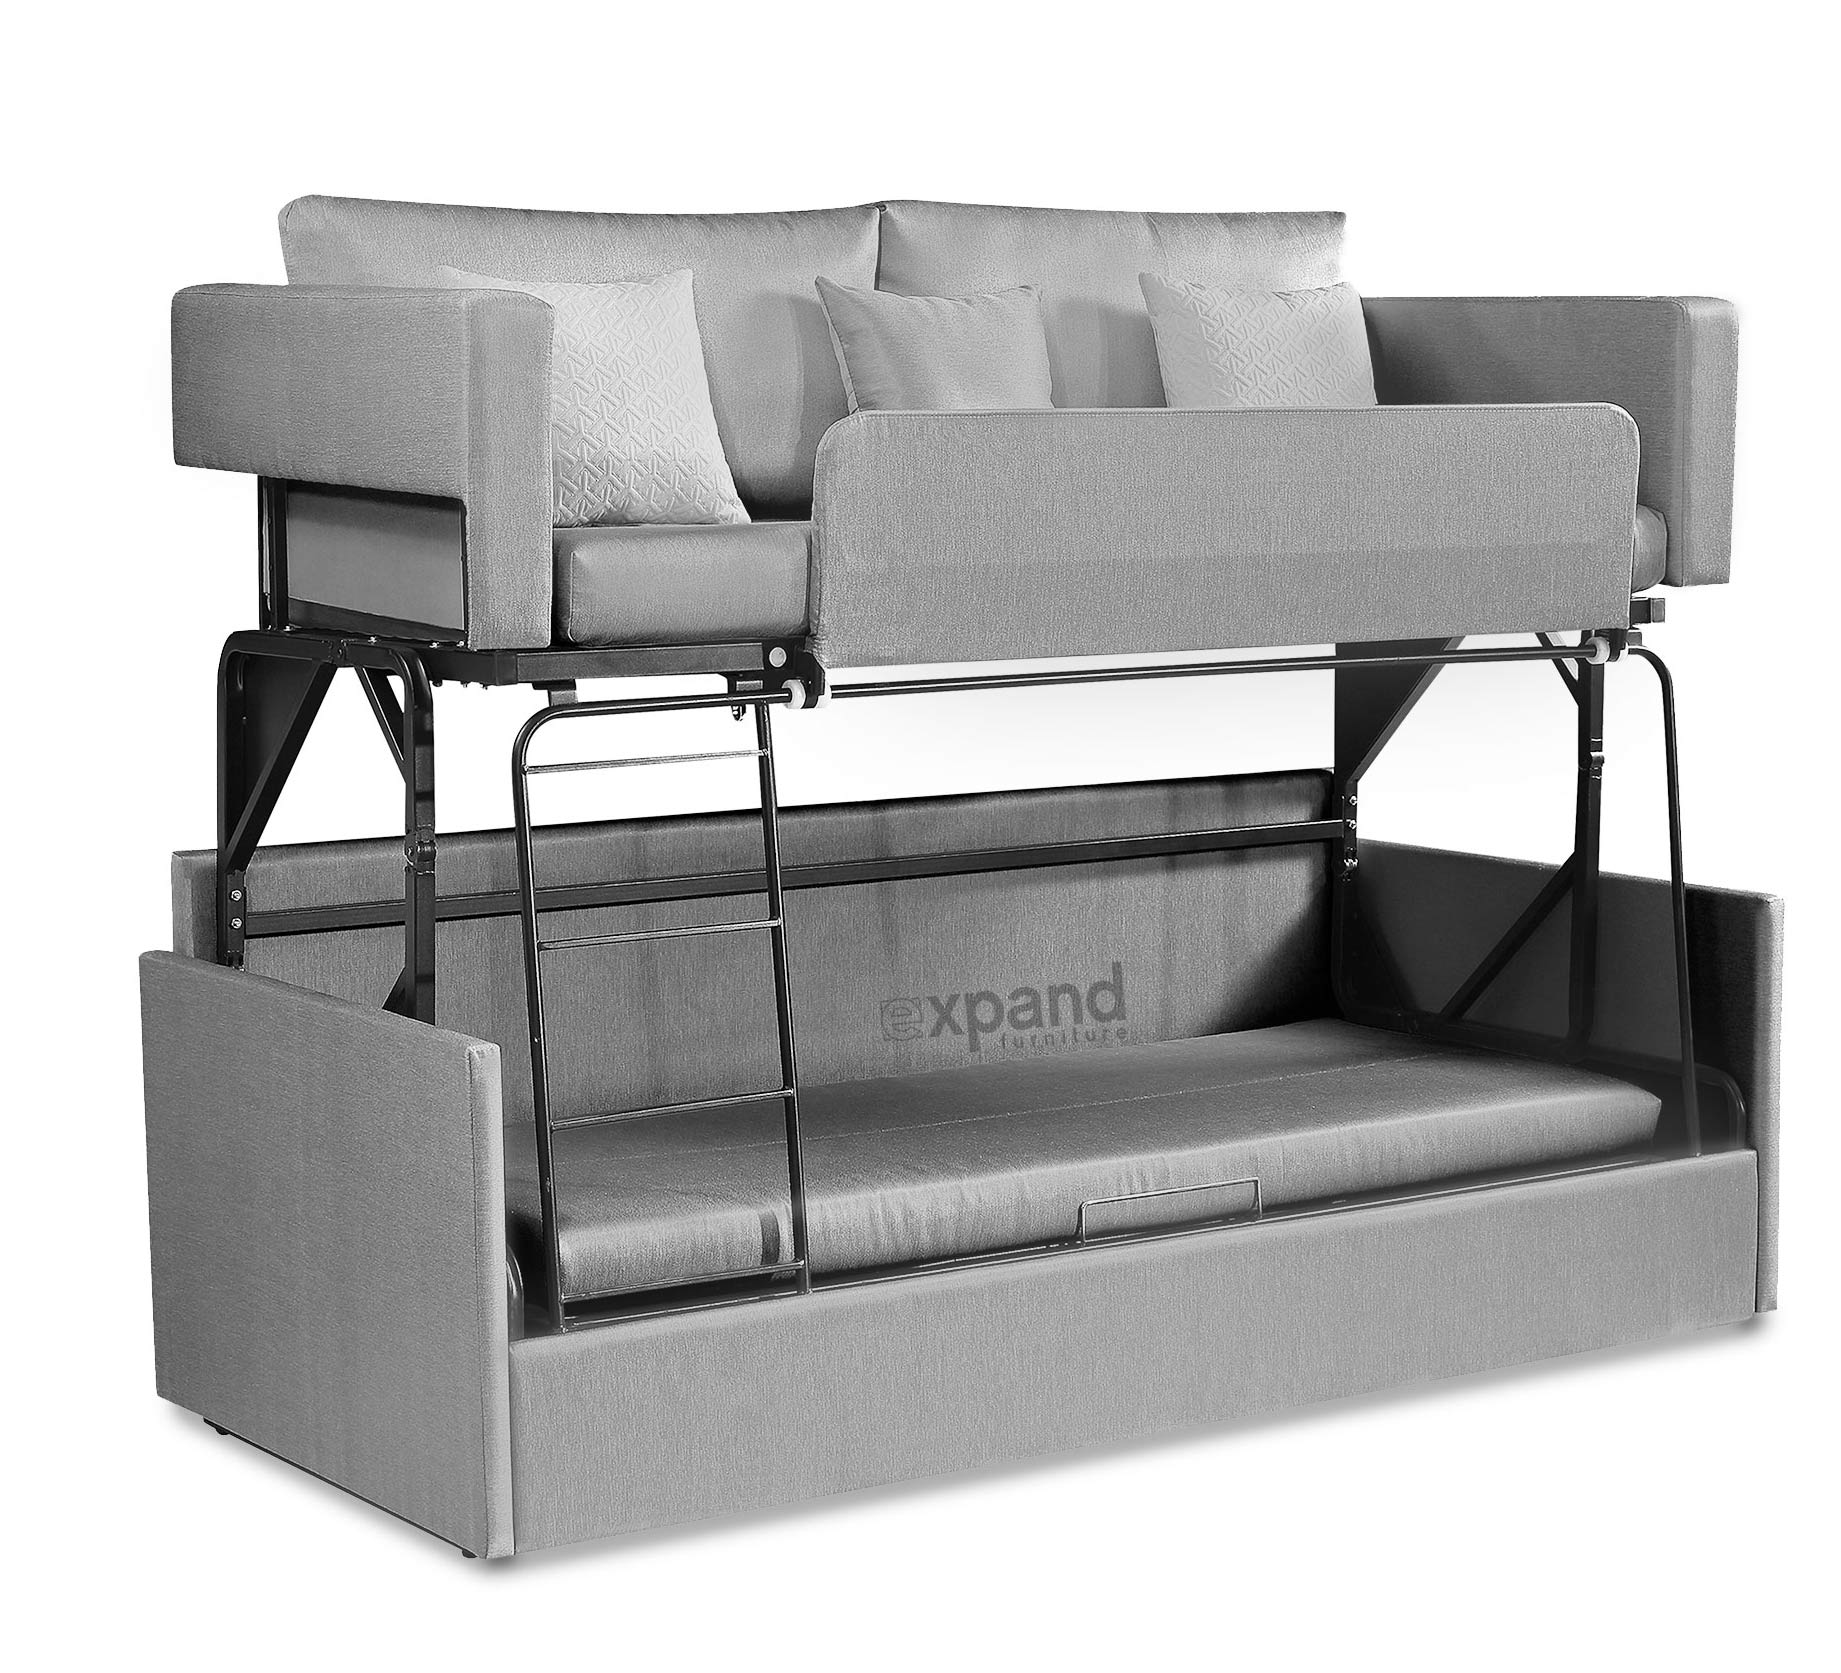 Double Decker Couch Real Life Version, How Much Should A Sleeper Sofa Cost